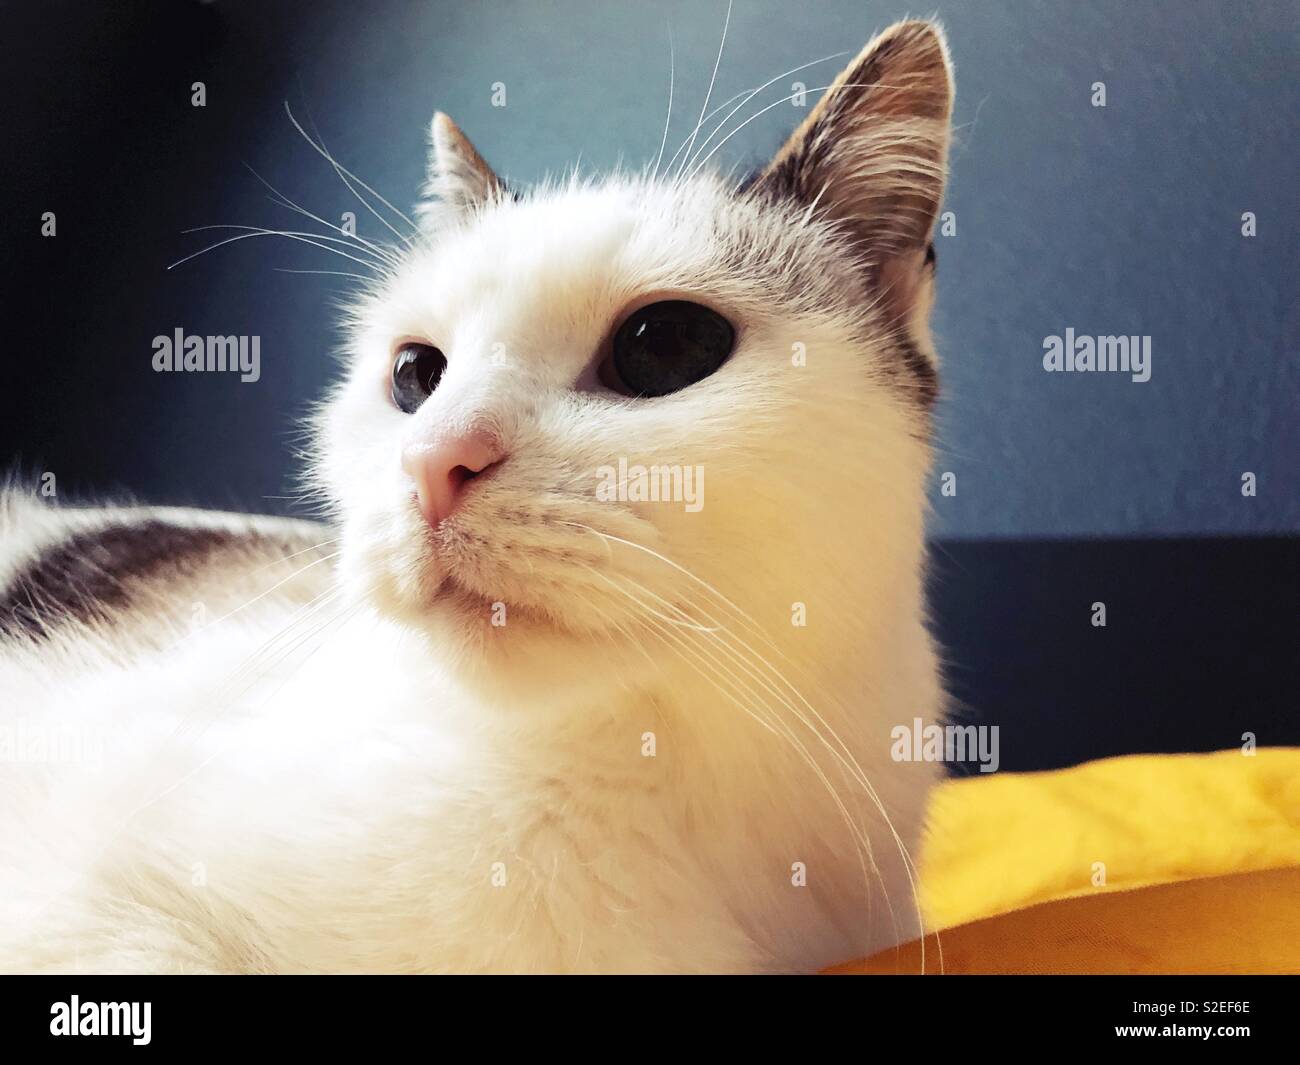 A pretty white cat with big eyes. Stock Photo